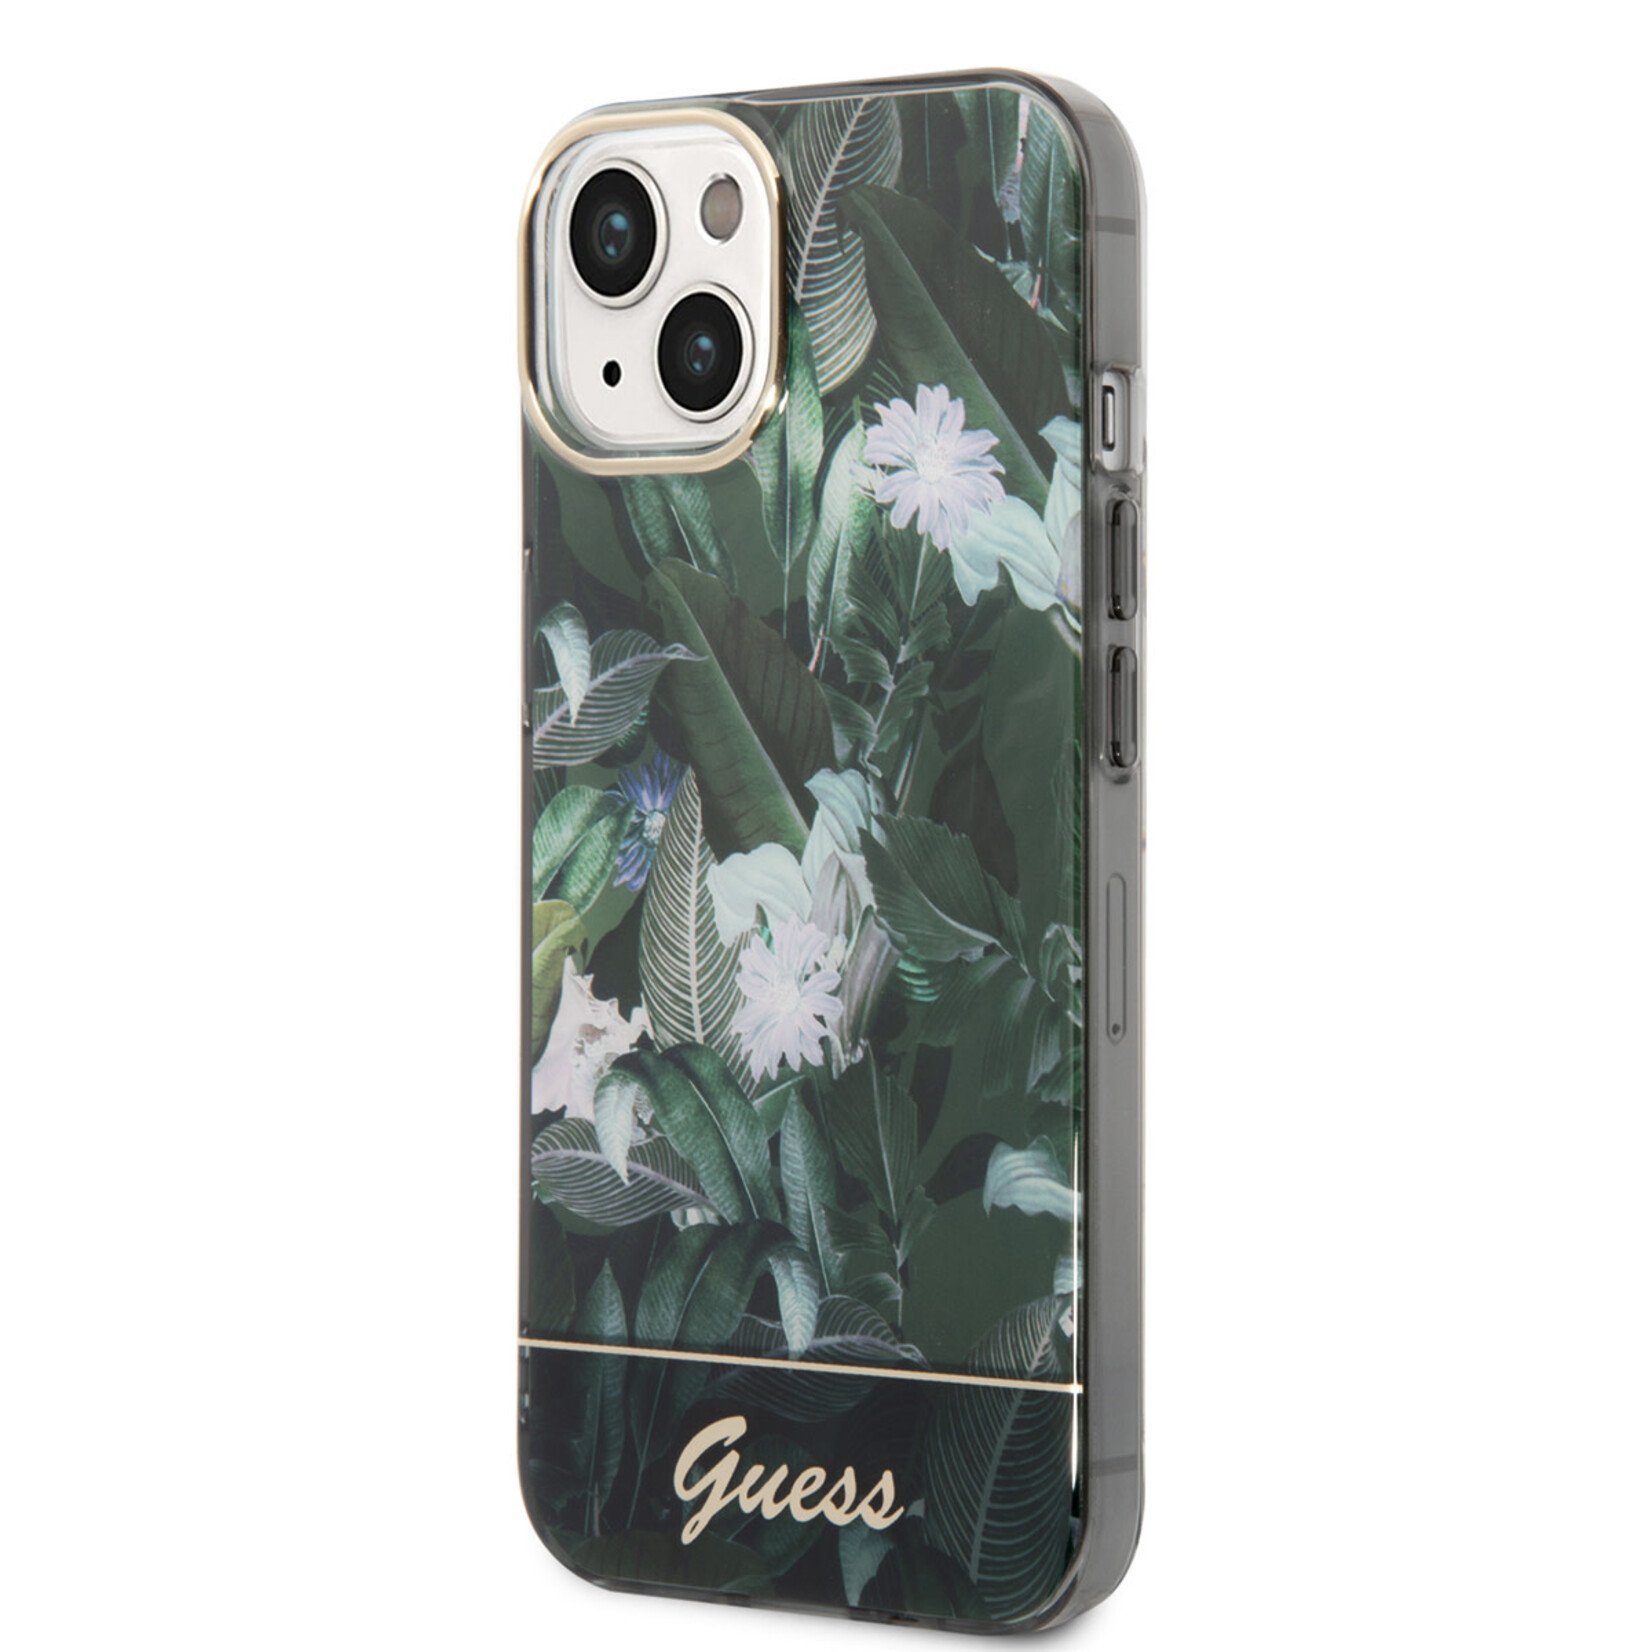 Guess Guess hoesje voor iPhone 14 - Backcover - Jungle Collectie - Groen